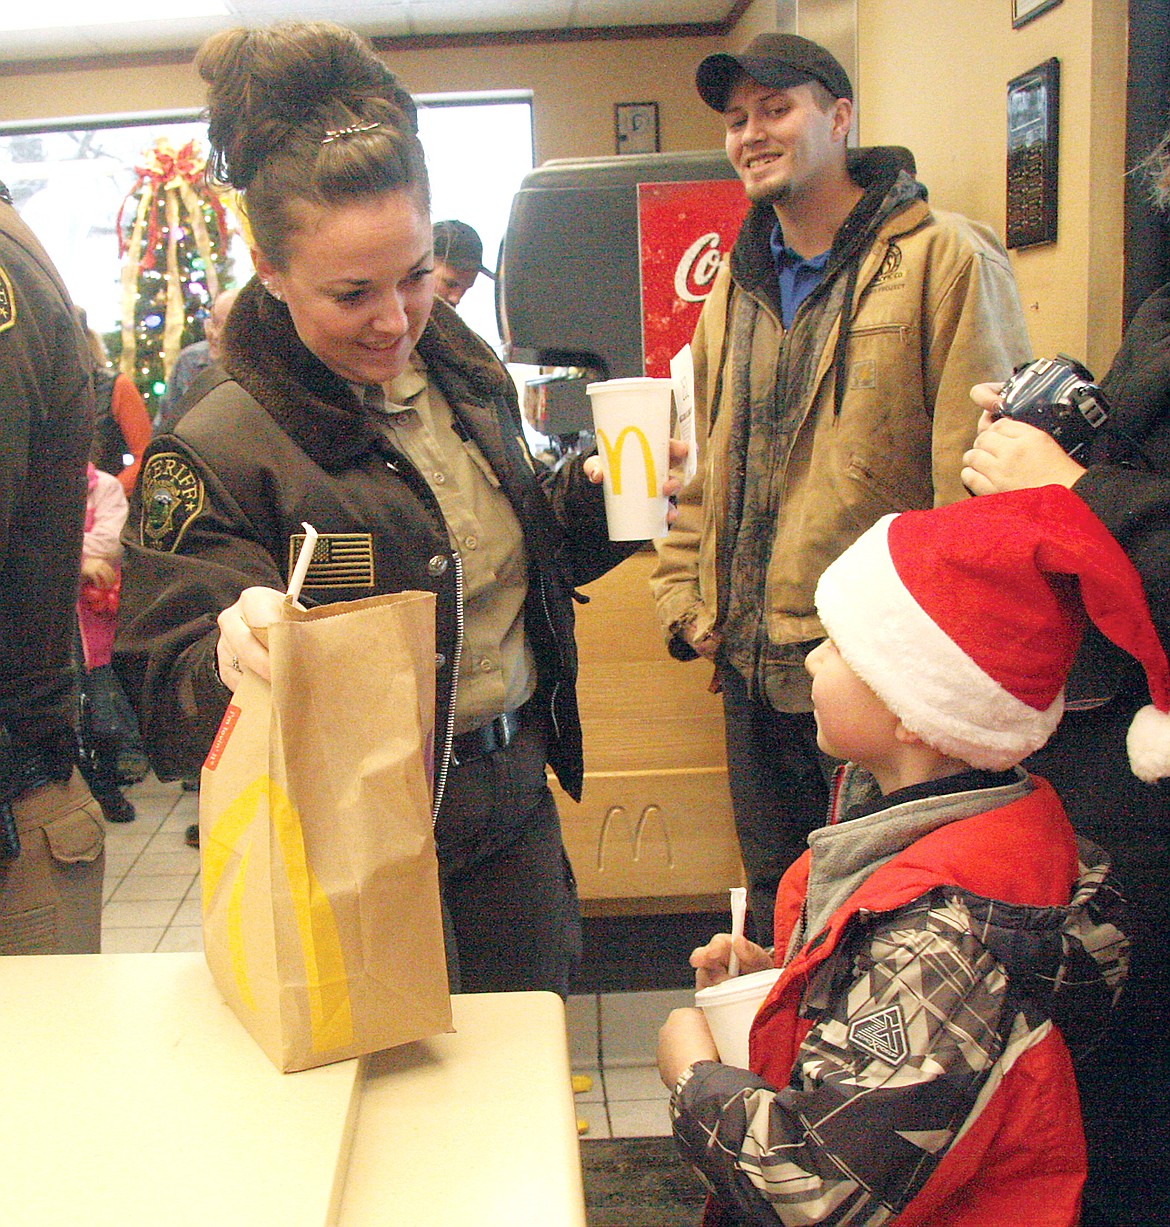 Sheriff&#146;s Deputy Chanel Geer handing Riley Stoltz his meal at McDonald&#146;s as part of the fourth annual Shop with a Cop. (Bethany Rolfson/TWN)